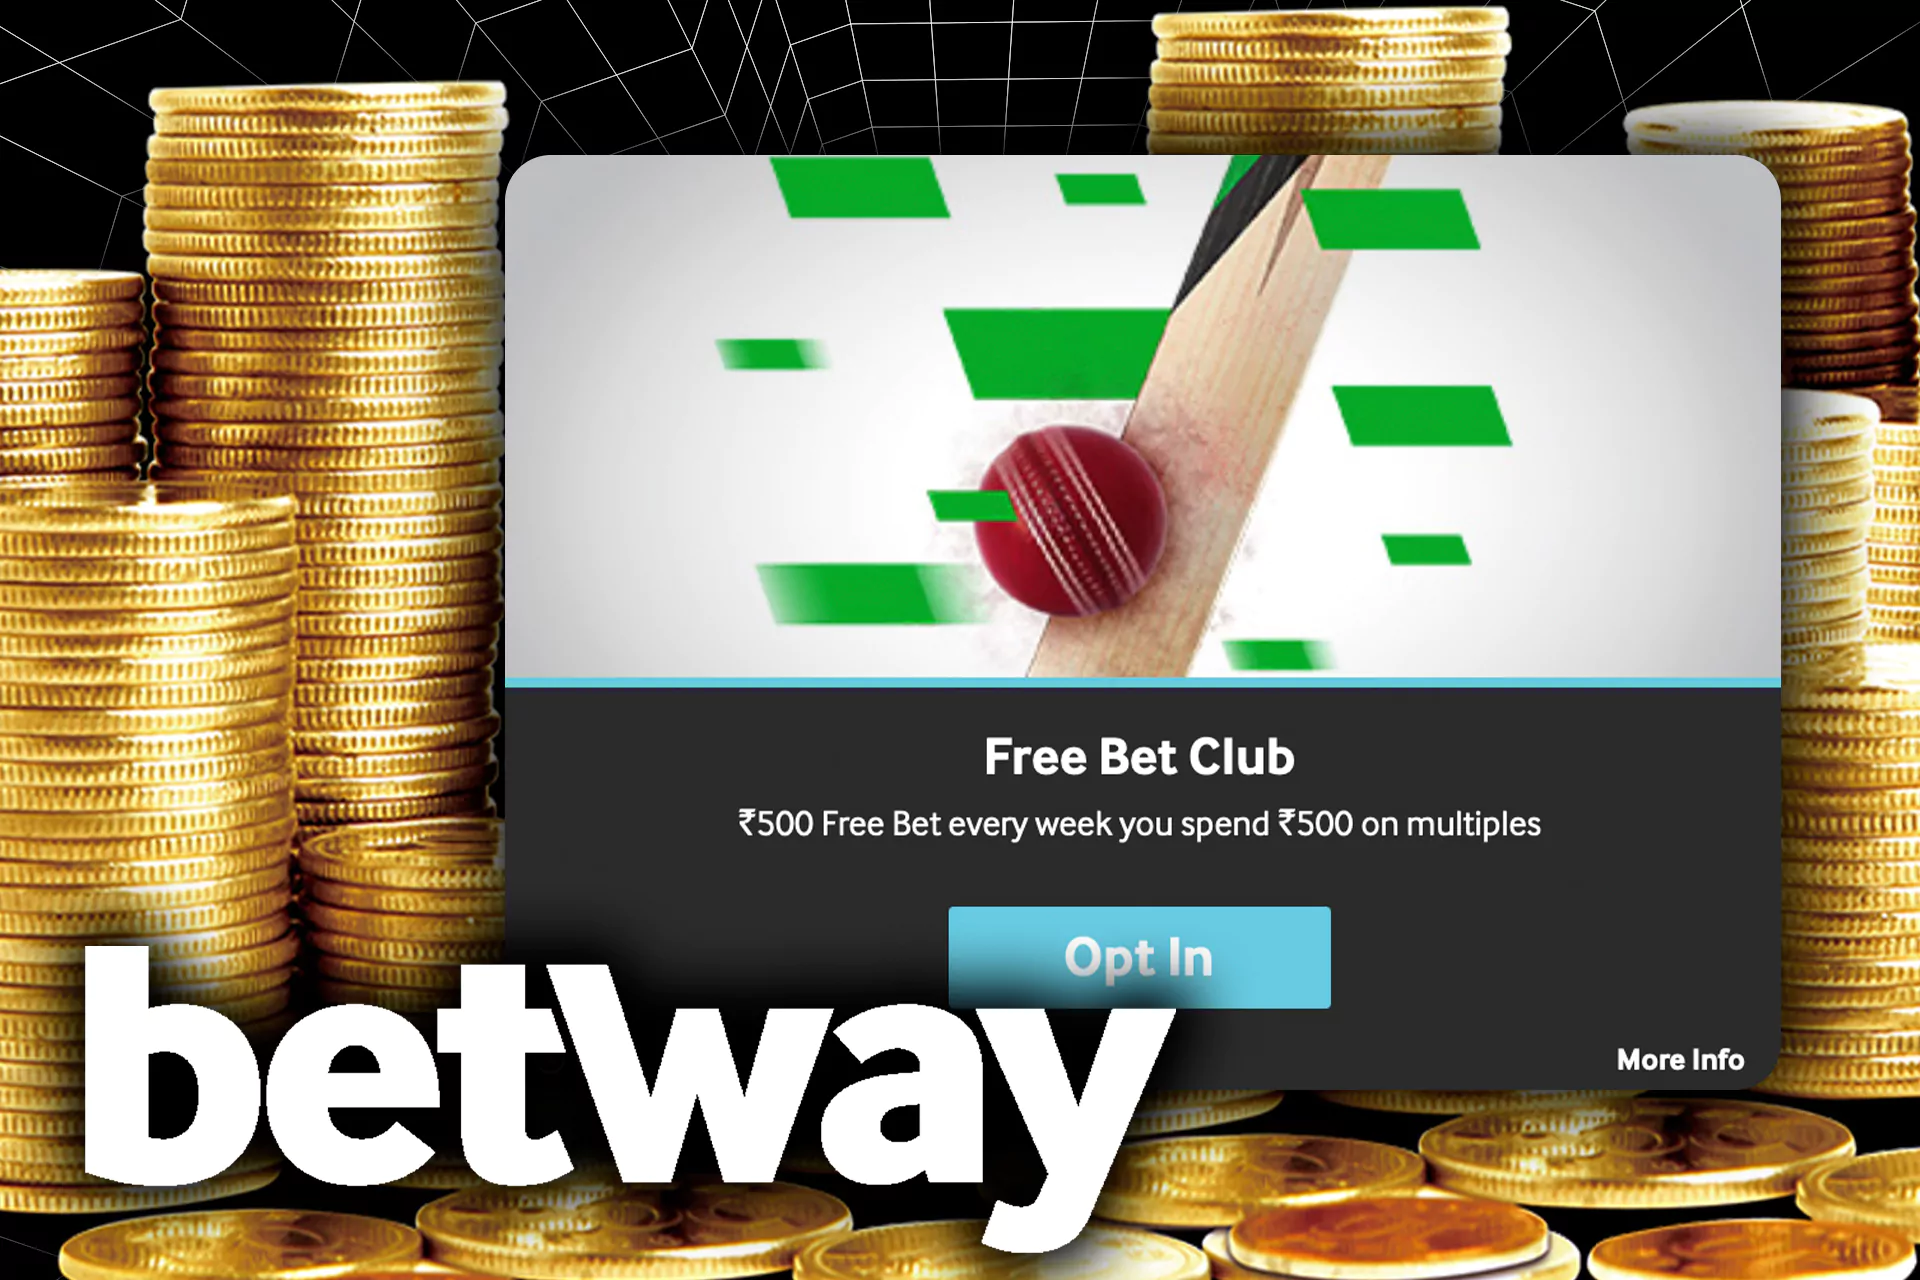 The Free Bet Club is a regular bonus program available for all users.